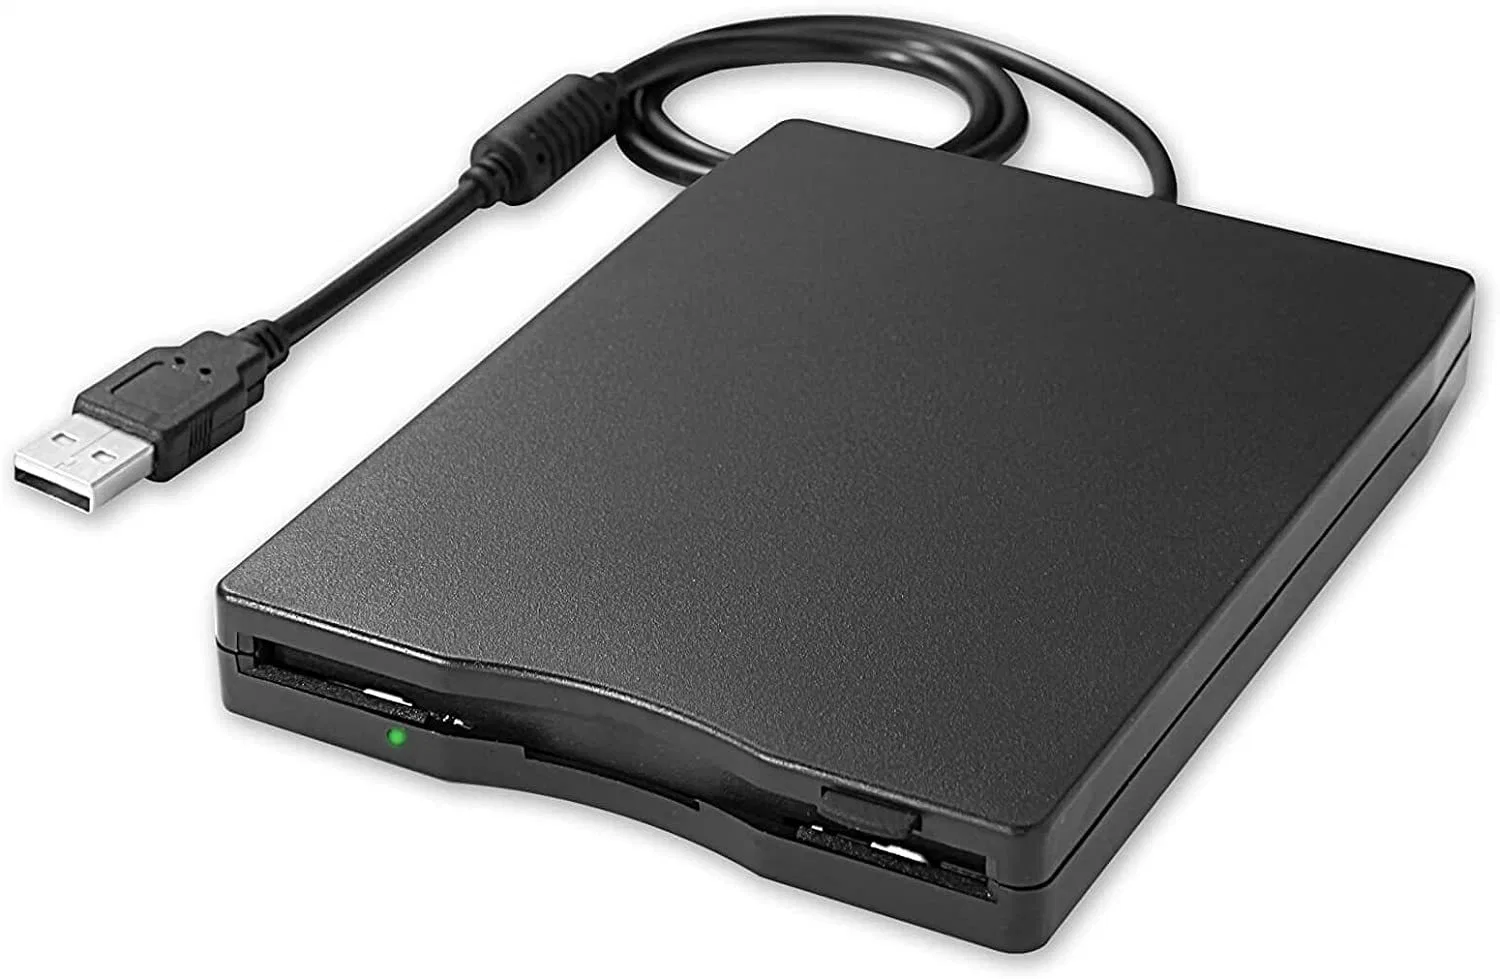 1.44MB USB Portable External Diskette Drive 3.5 Inches Floppy Drive